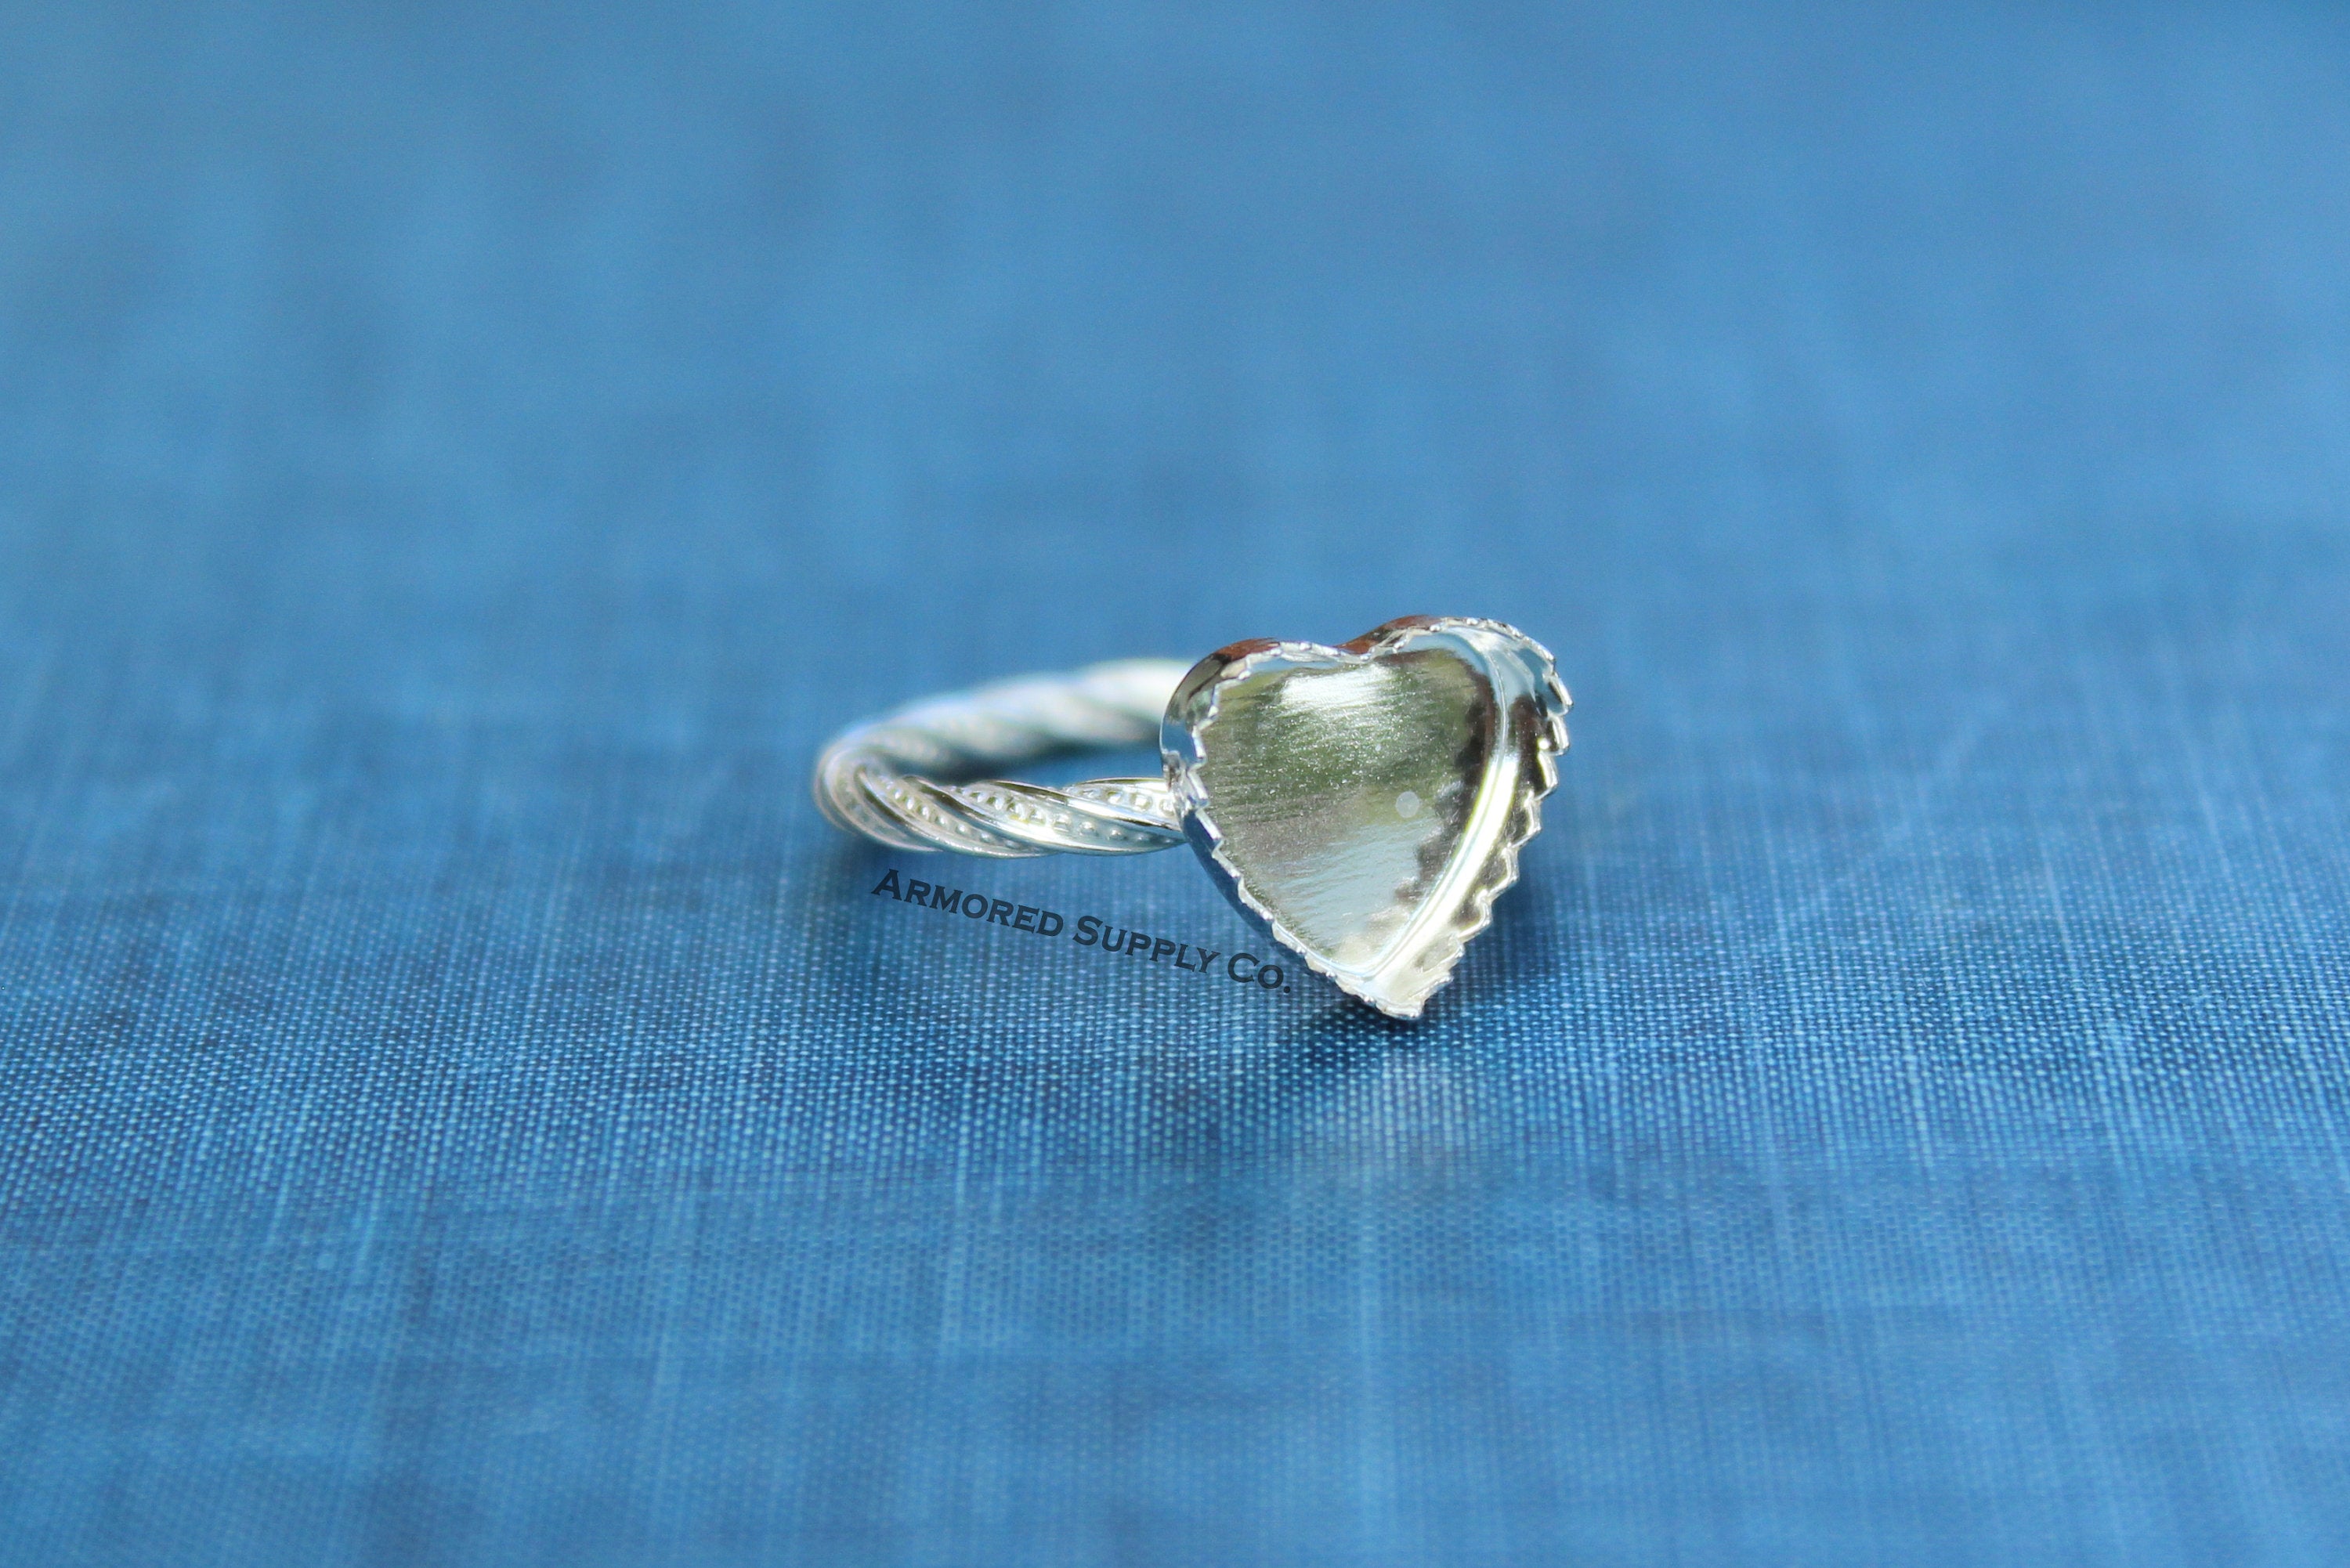 Sterling Silver Heart Bezel Cup Dotted Ring blank, Heart Cabochon, Cab Pad Breast Milk, jewelry supplies, build your ring, wholesale jewelry